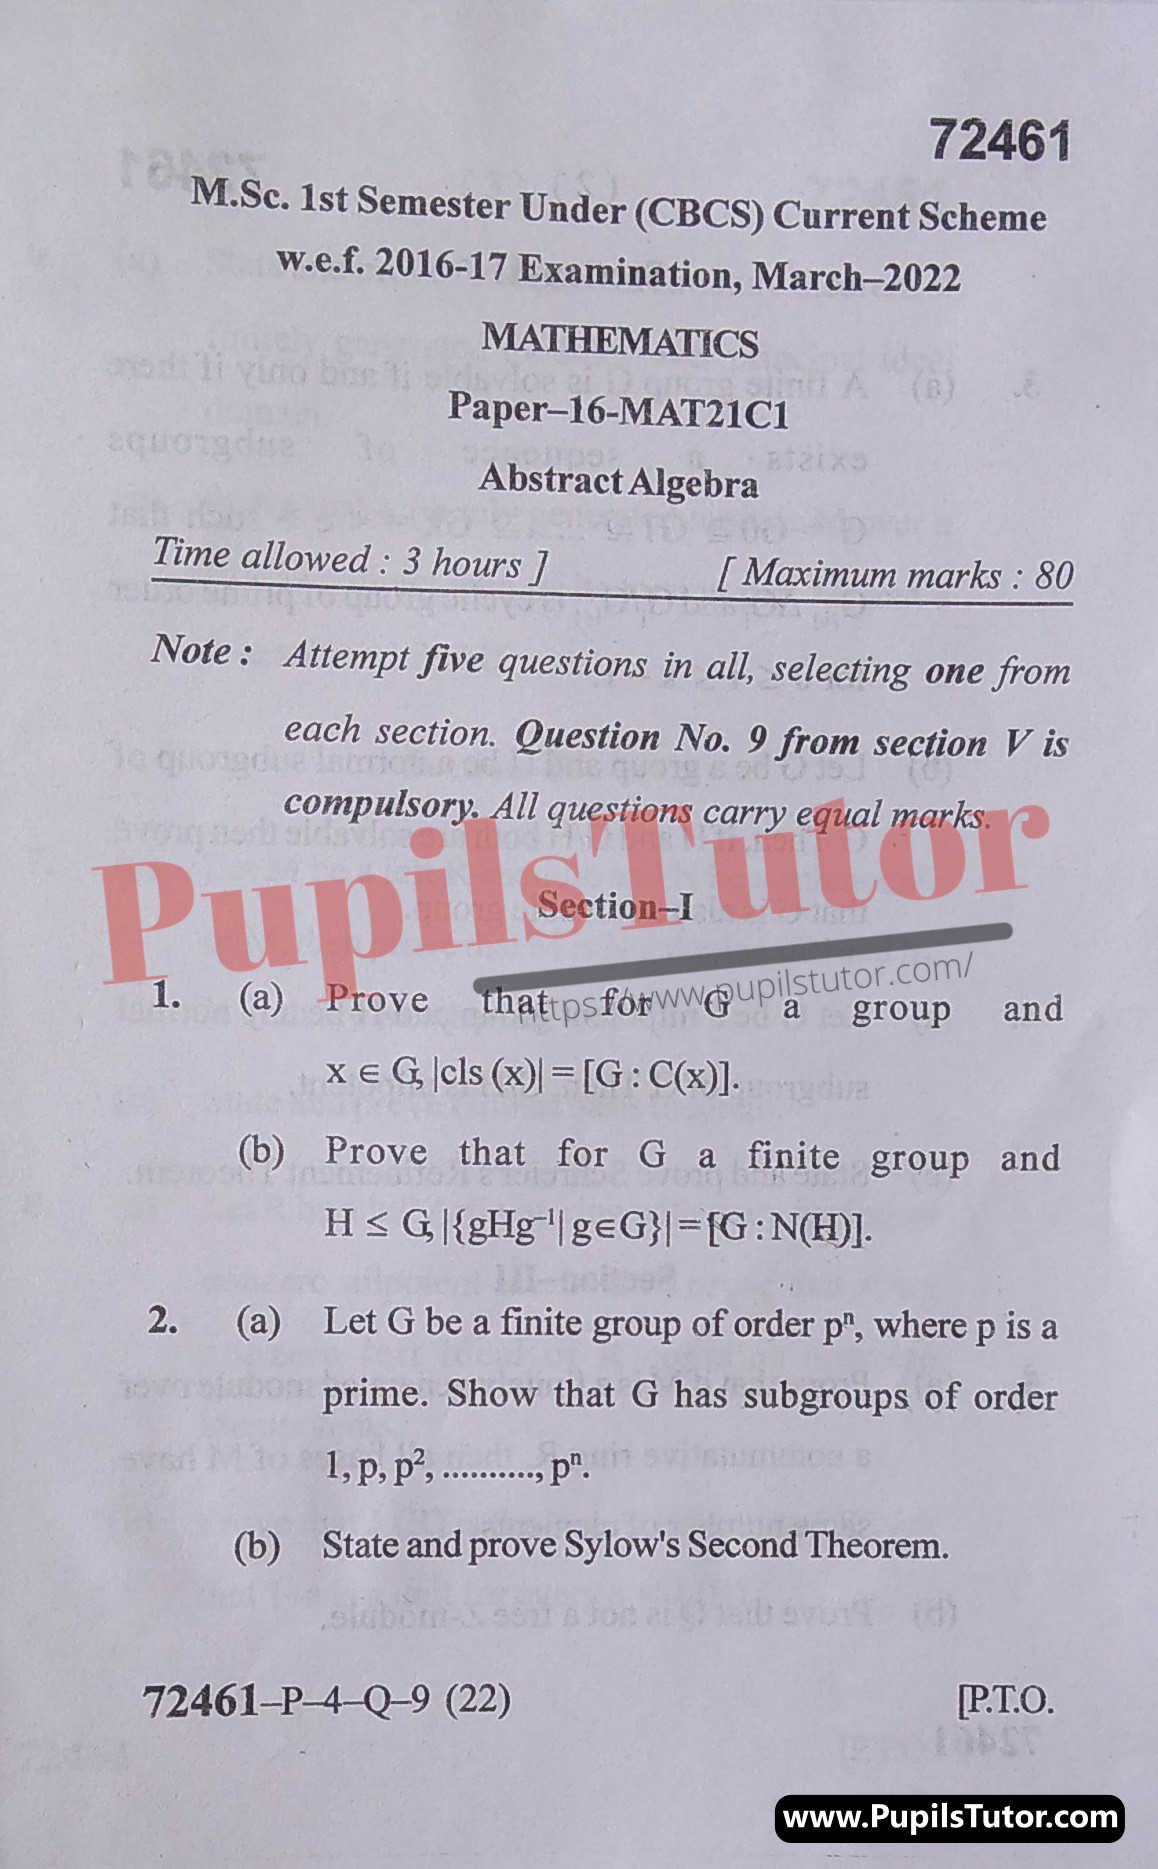 MDU (Maharshi Dayanand University, Rohtak Haryana) MSc Mathematics CBCS Scheme First Semester Previous Year Abstract Algebra Question Paper For March, 2022 Exam (Question Paper Page 1) - pupilstutor.com